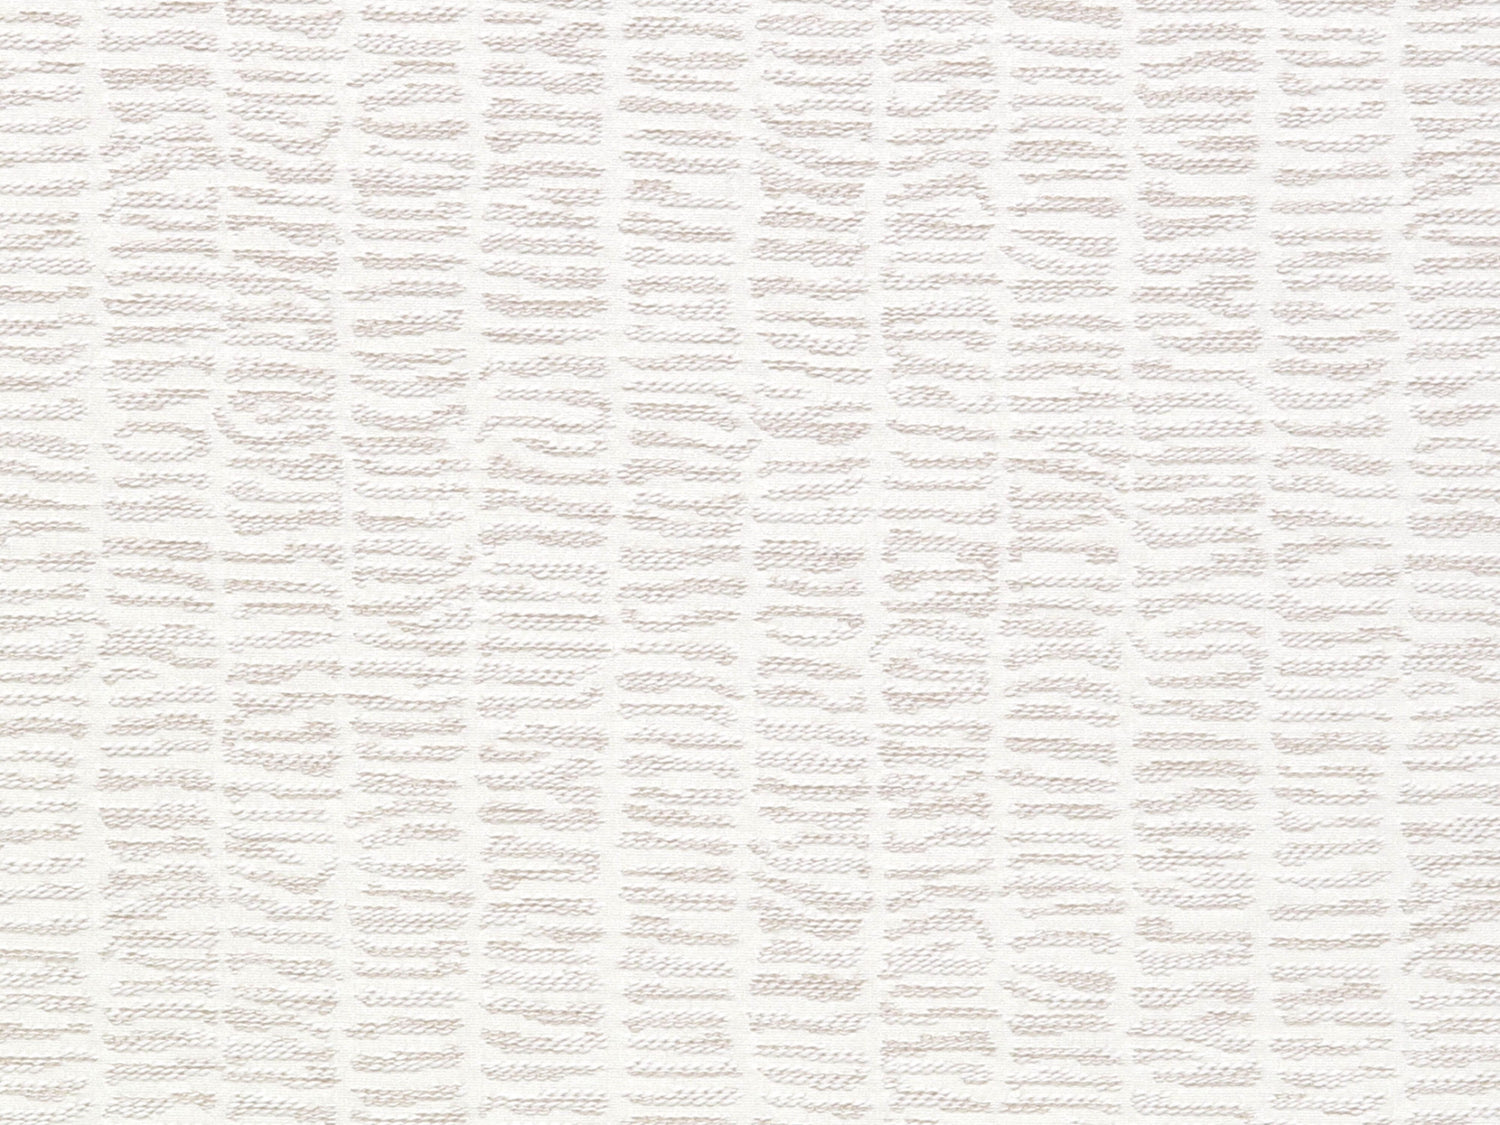 Snow Board fabric in winter white color - pattern number LU 0001P080 - by Scalamandre in the Old World Weavers collection